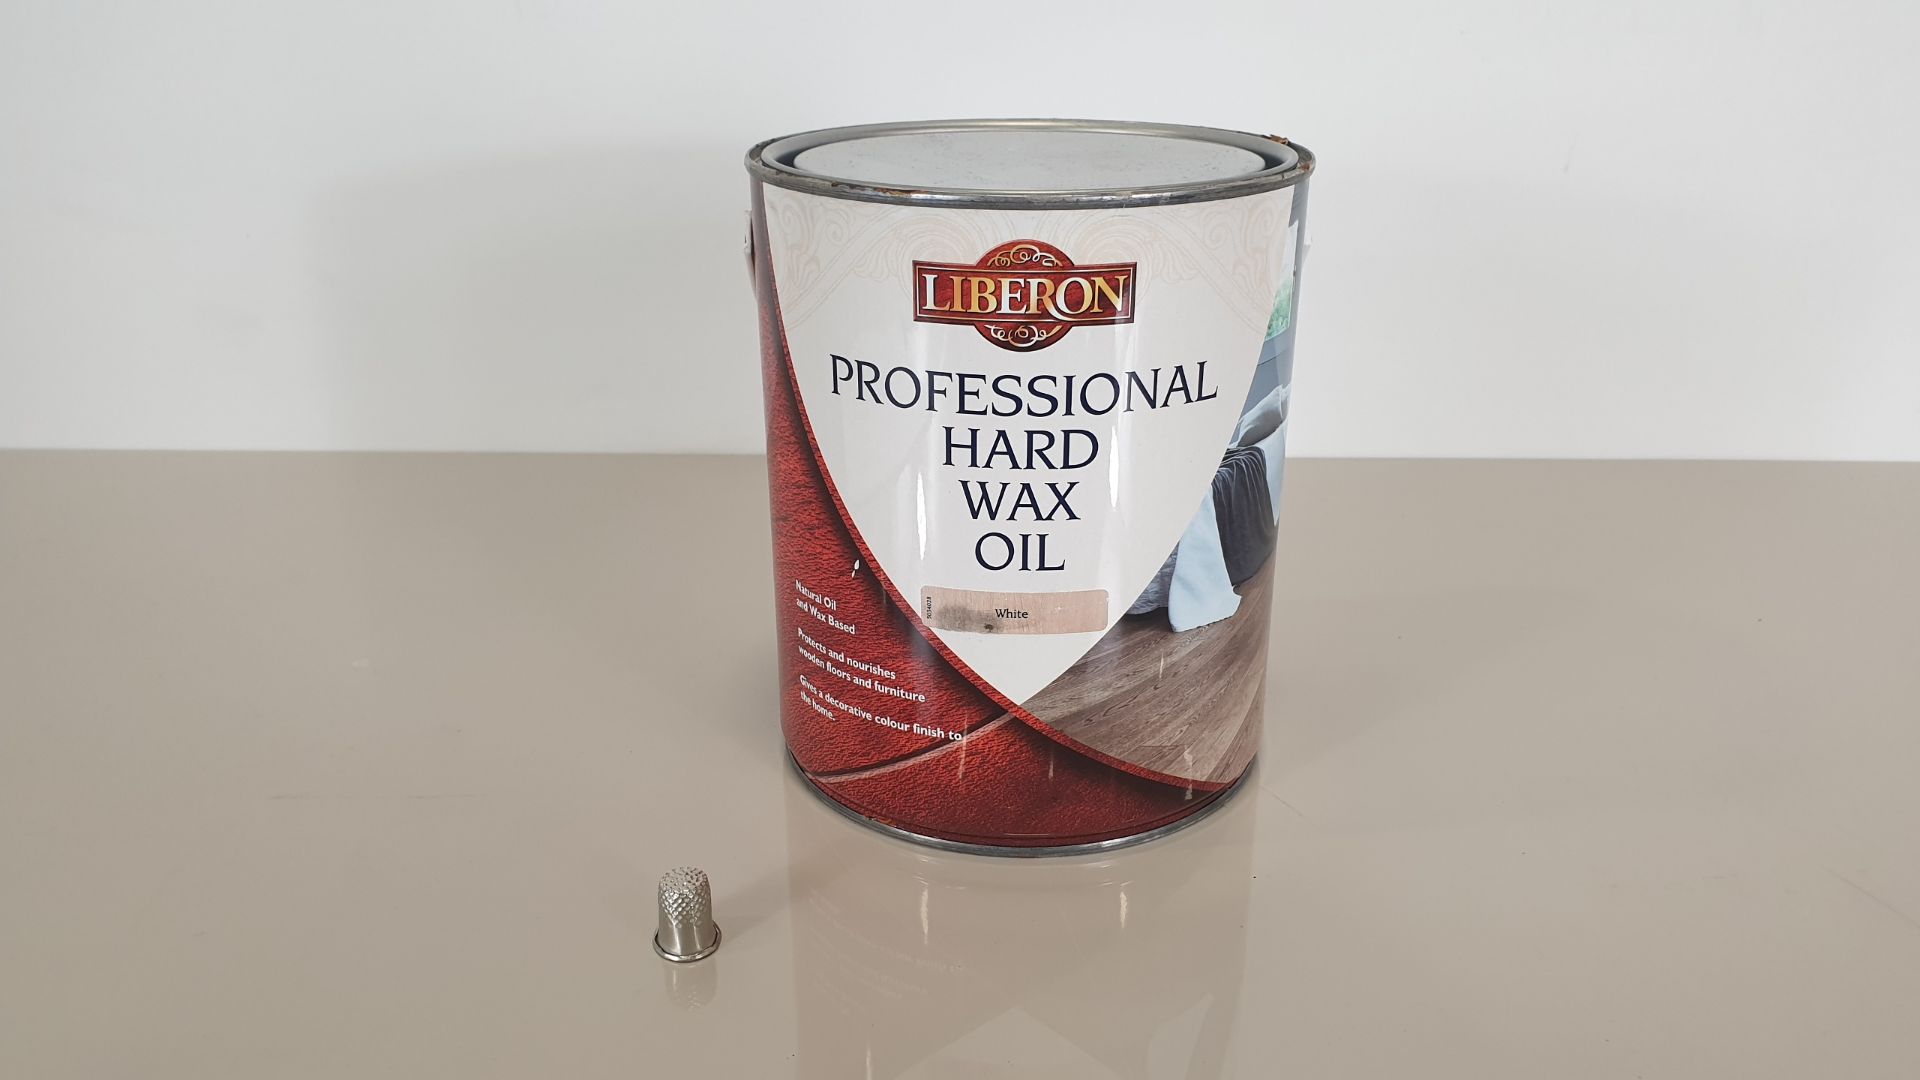 (LOT FOR THURSDAY 28TH MAY AUCTION) 10 X LIBERON 2.5 LITRE PROFESSIONAL HARD WAX OIL - WHITE